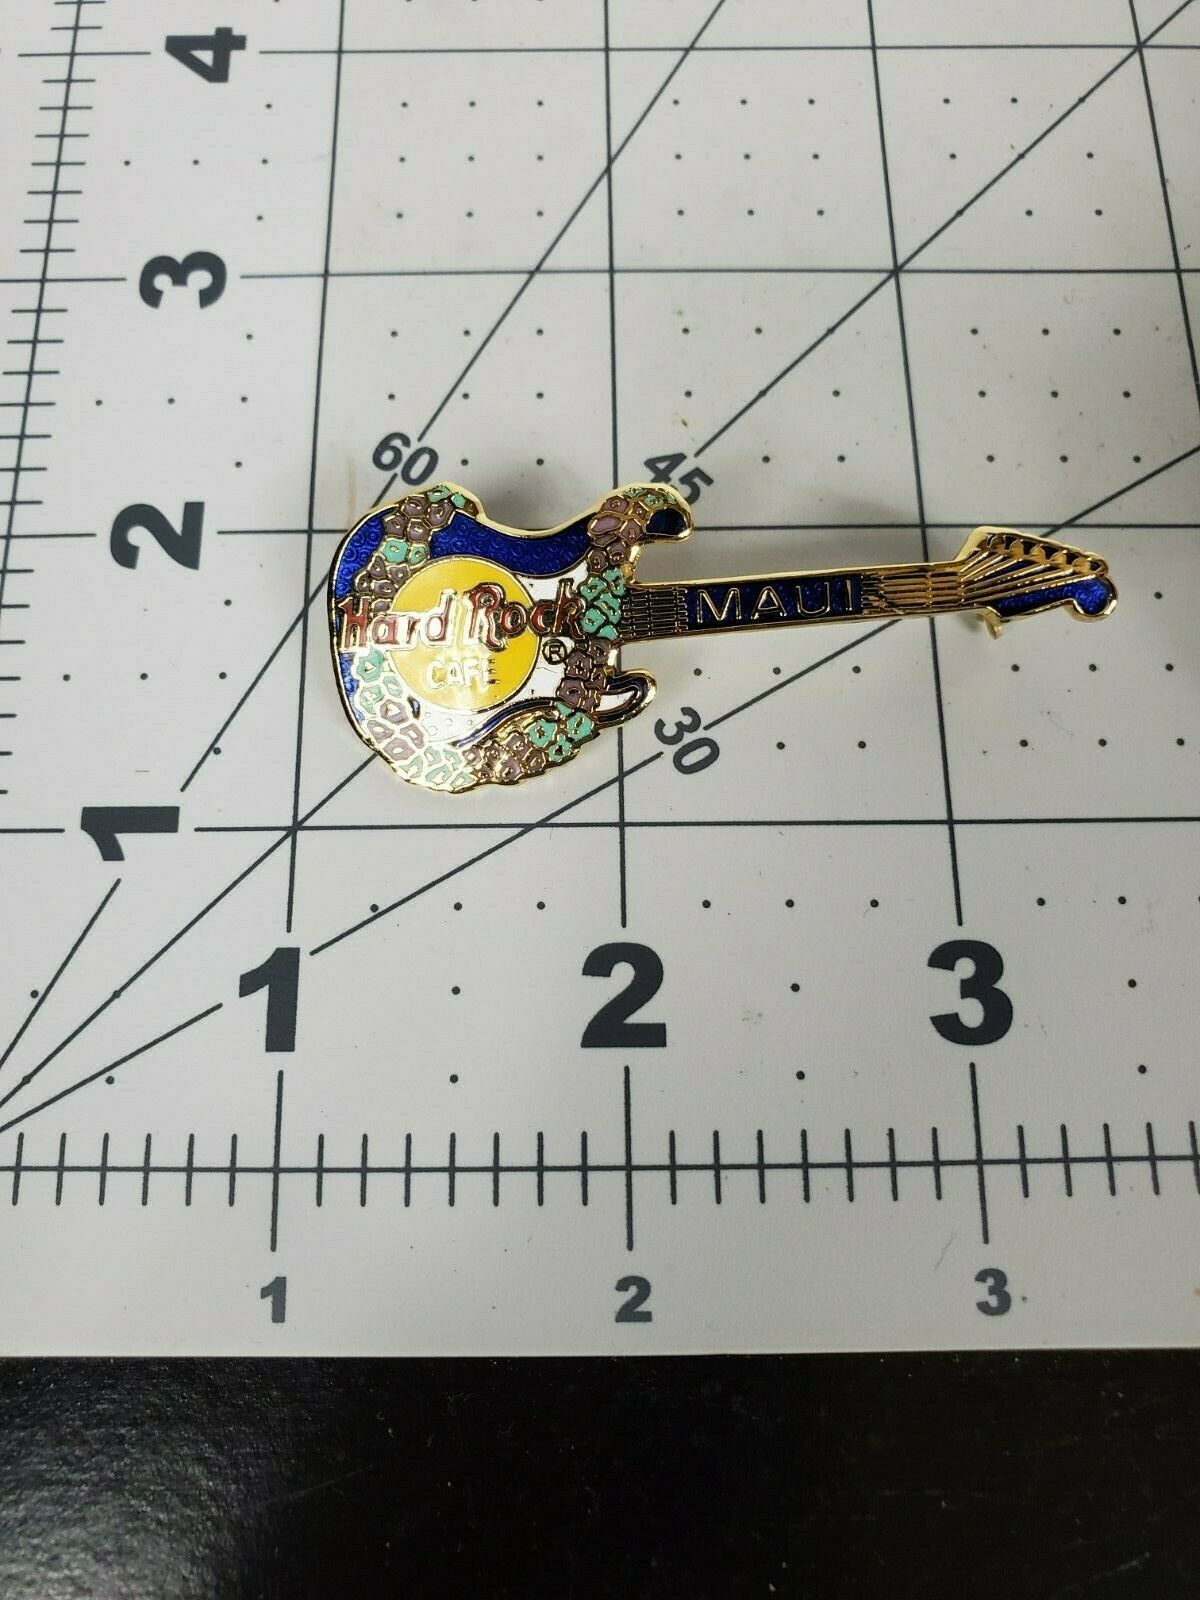 Primary image for Maui Hard Rock Cafe Guitar Pin